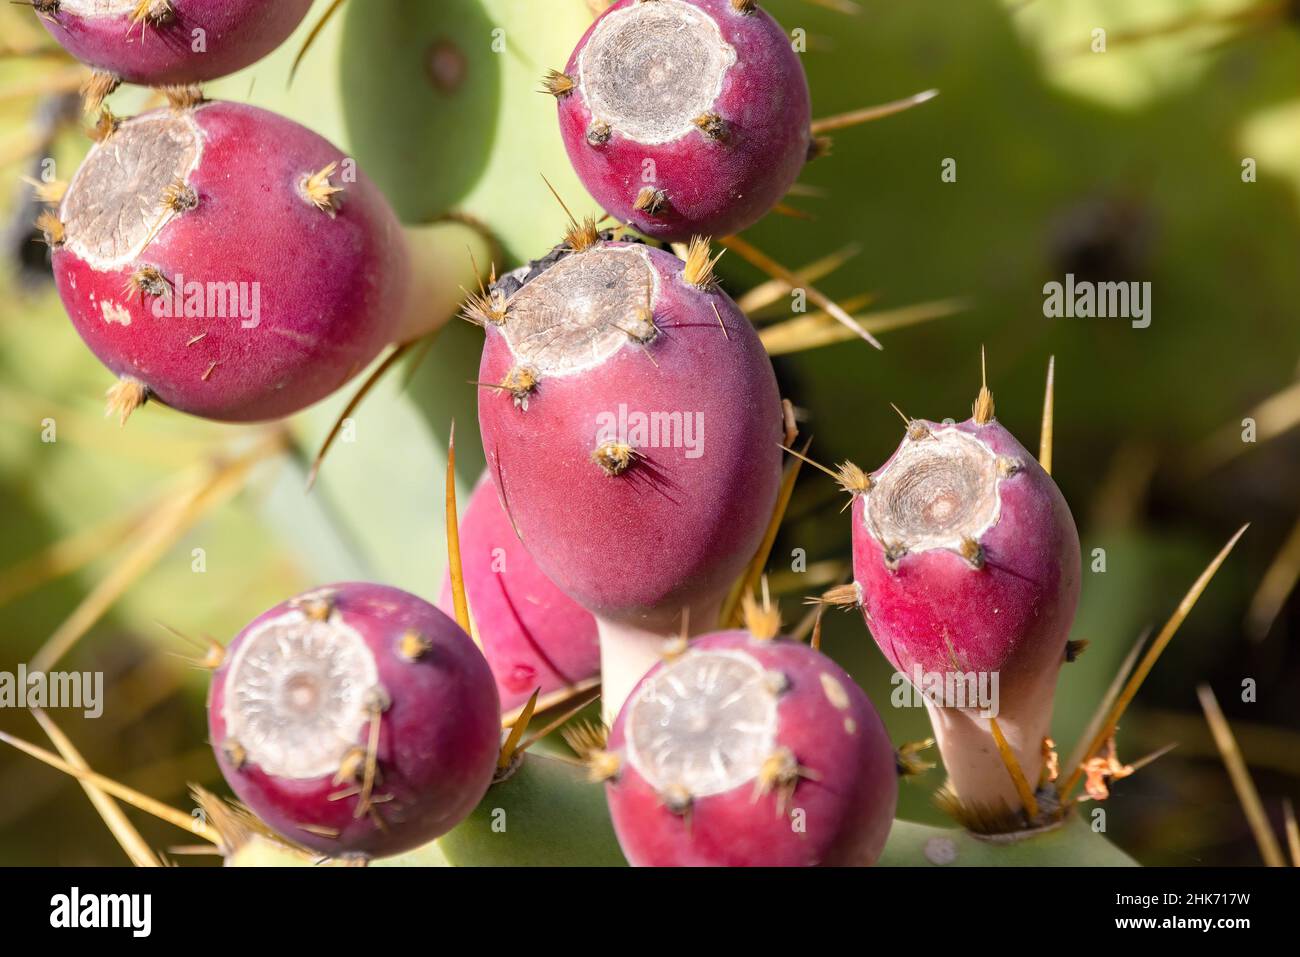 Ripe red fruits of Opuntia cactus, commonly called prickly pear or pear cactus Stock Photo